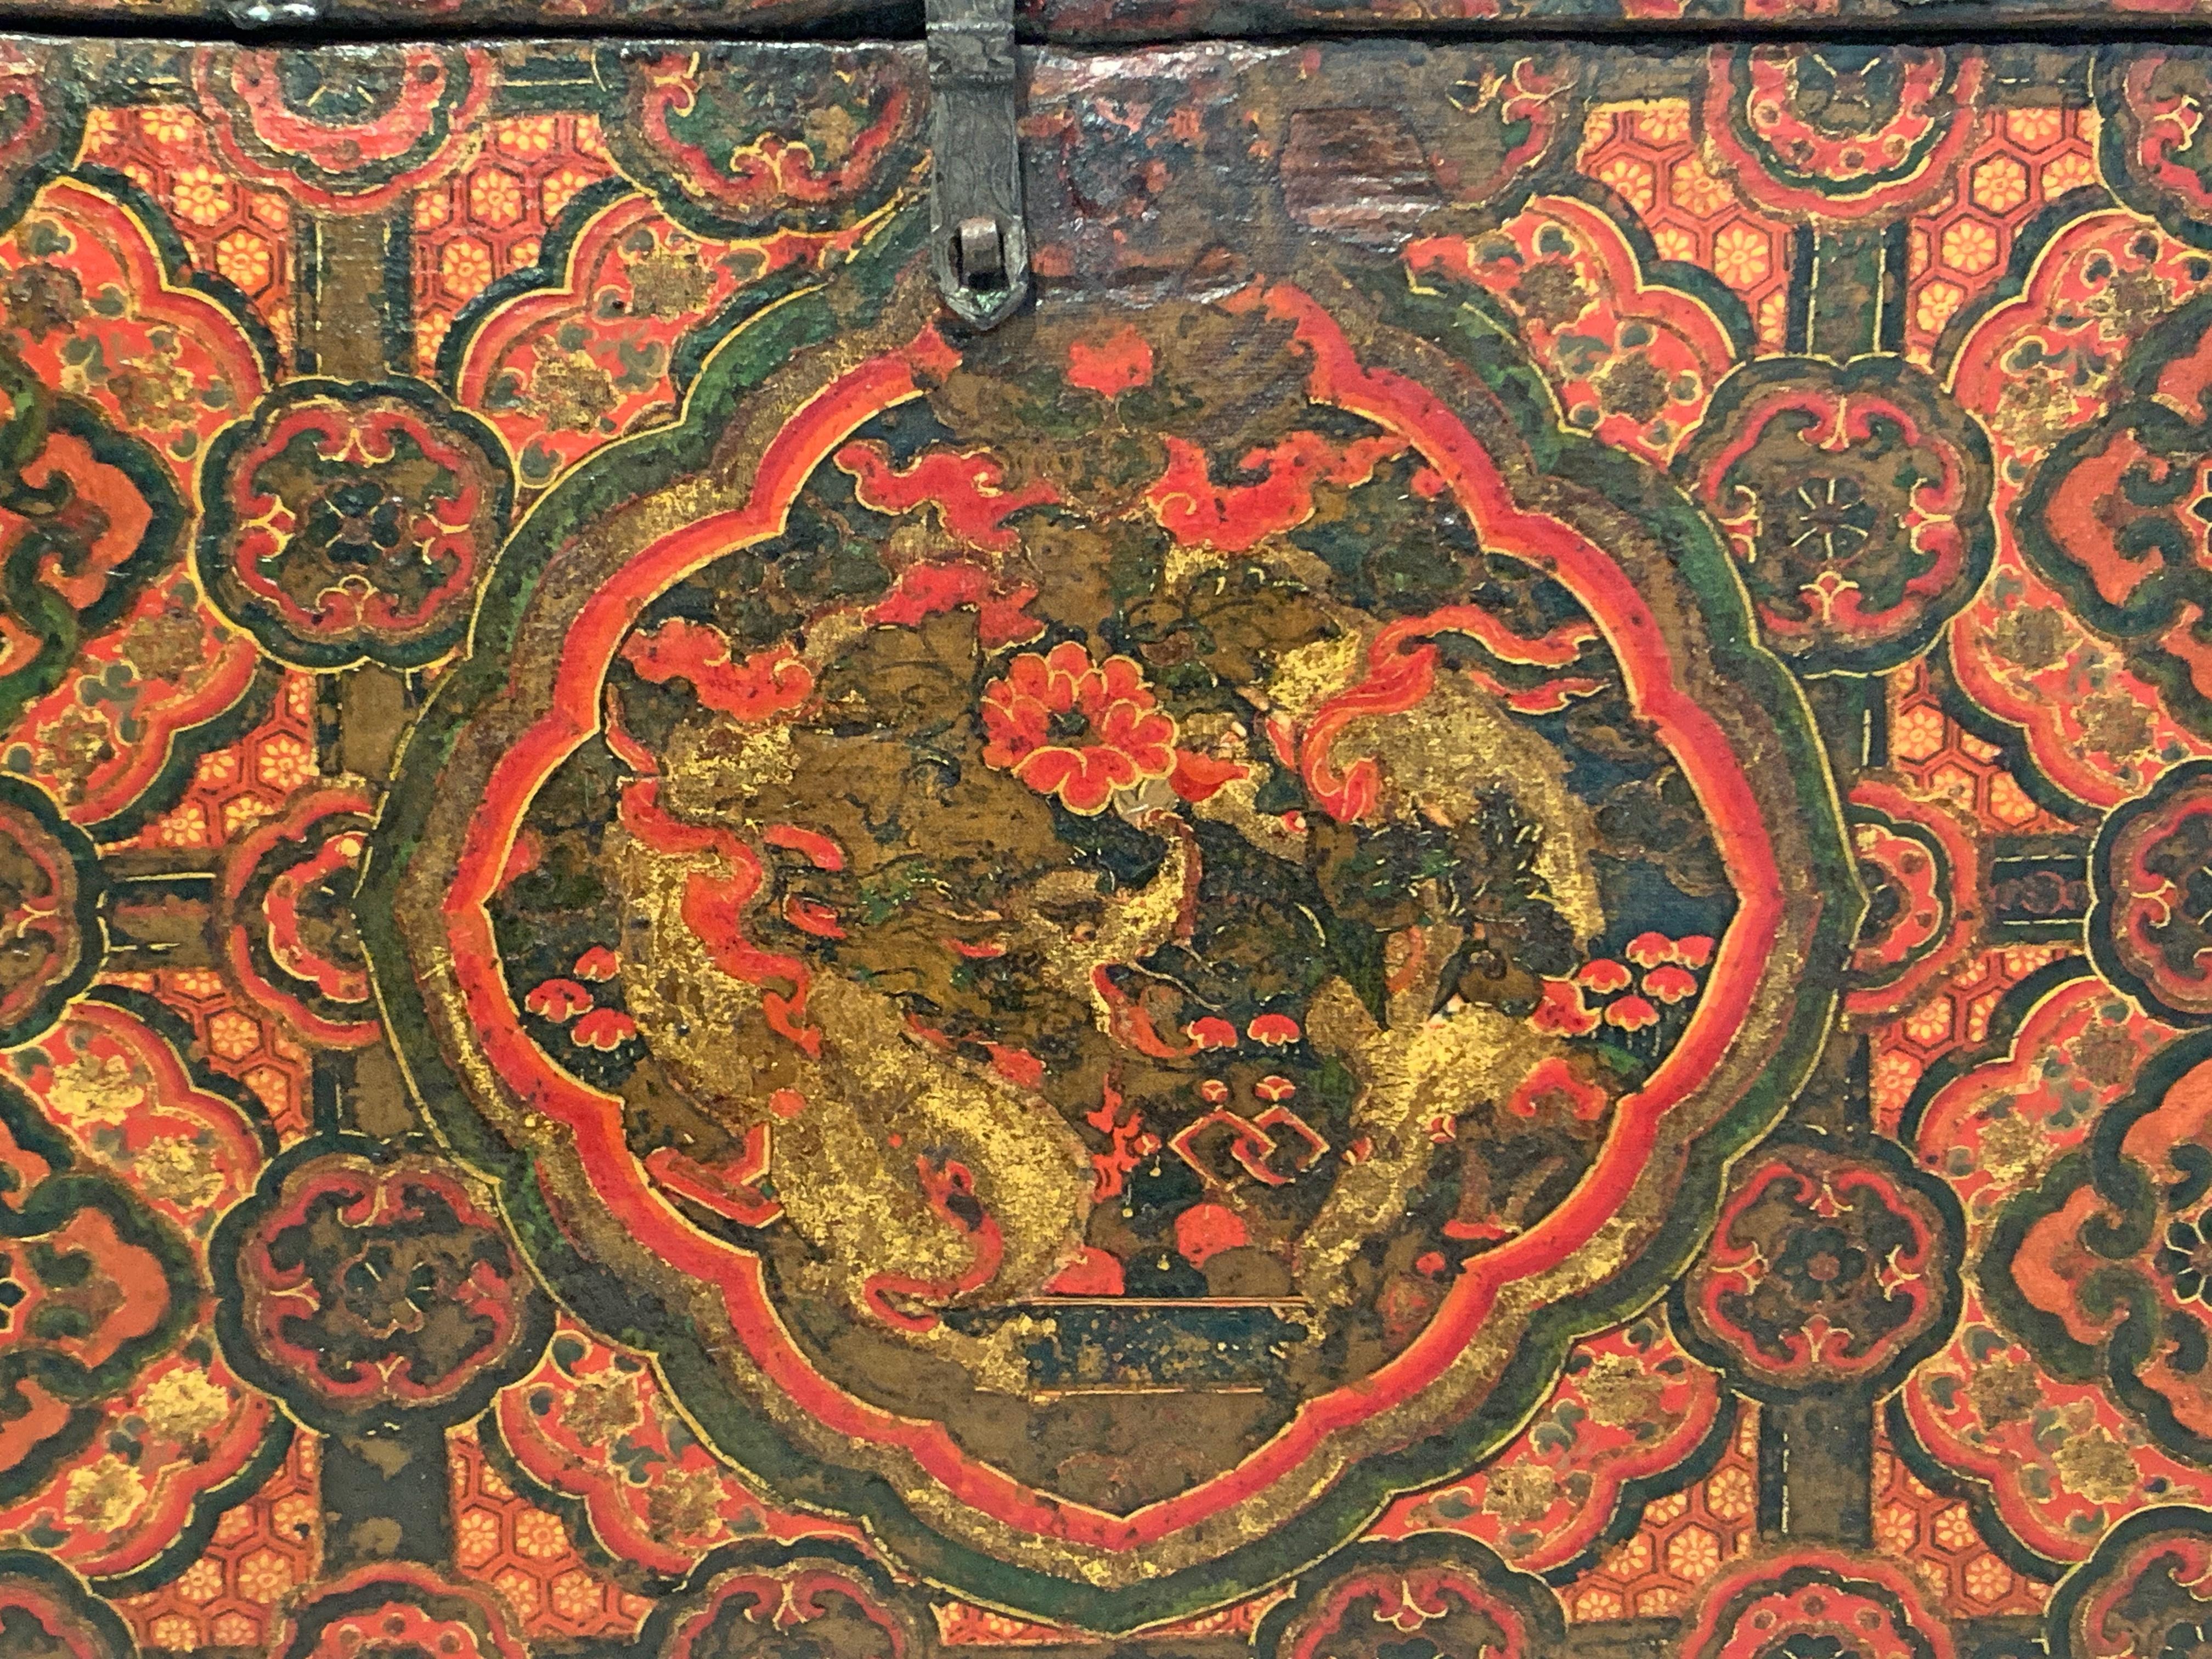 Tibetan Painted Trunk with Dragon and Brocade Design, 17th-18th Century, Tibet 2